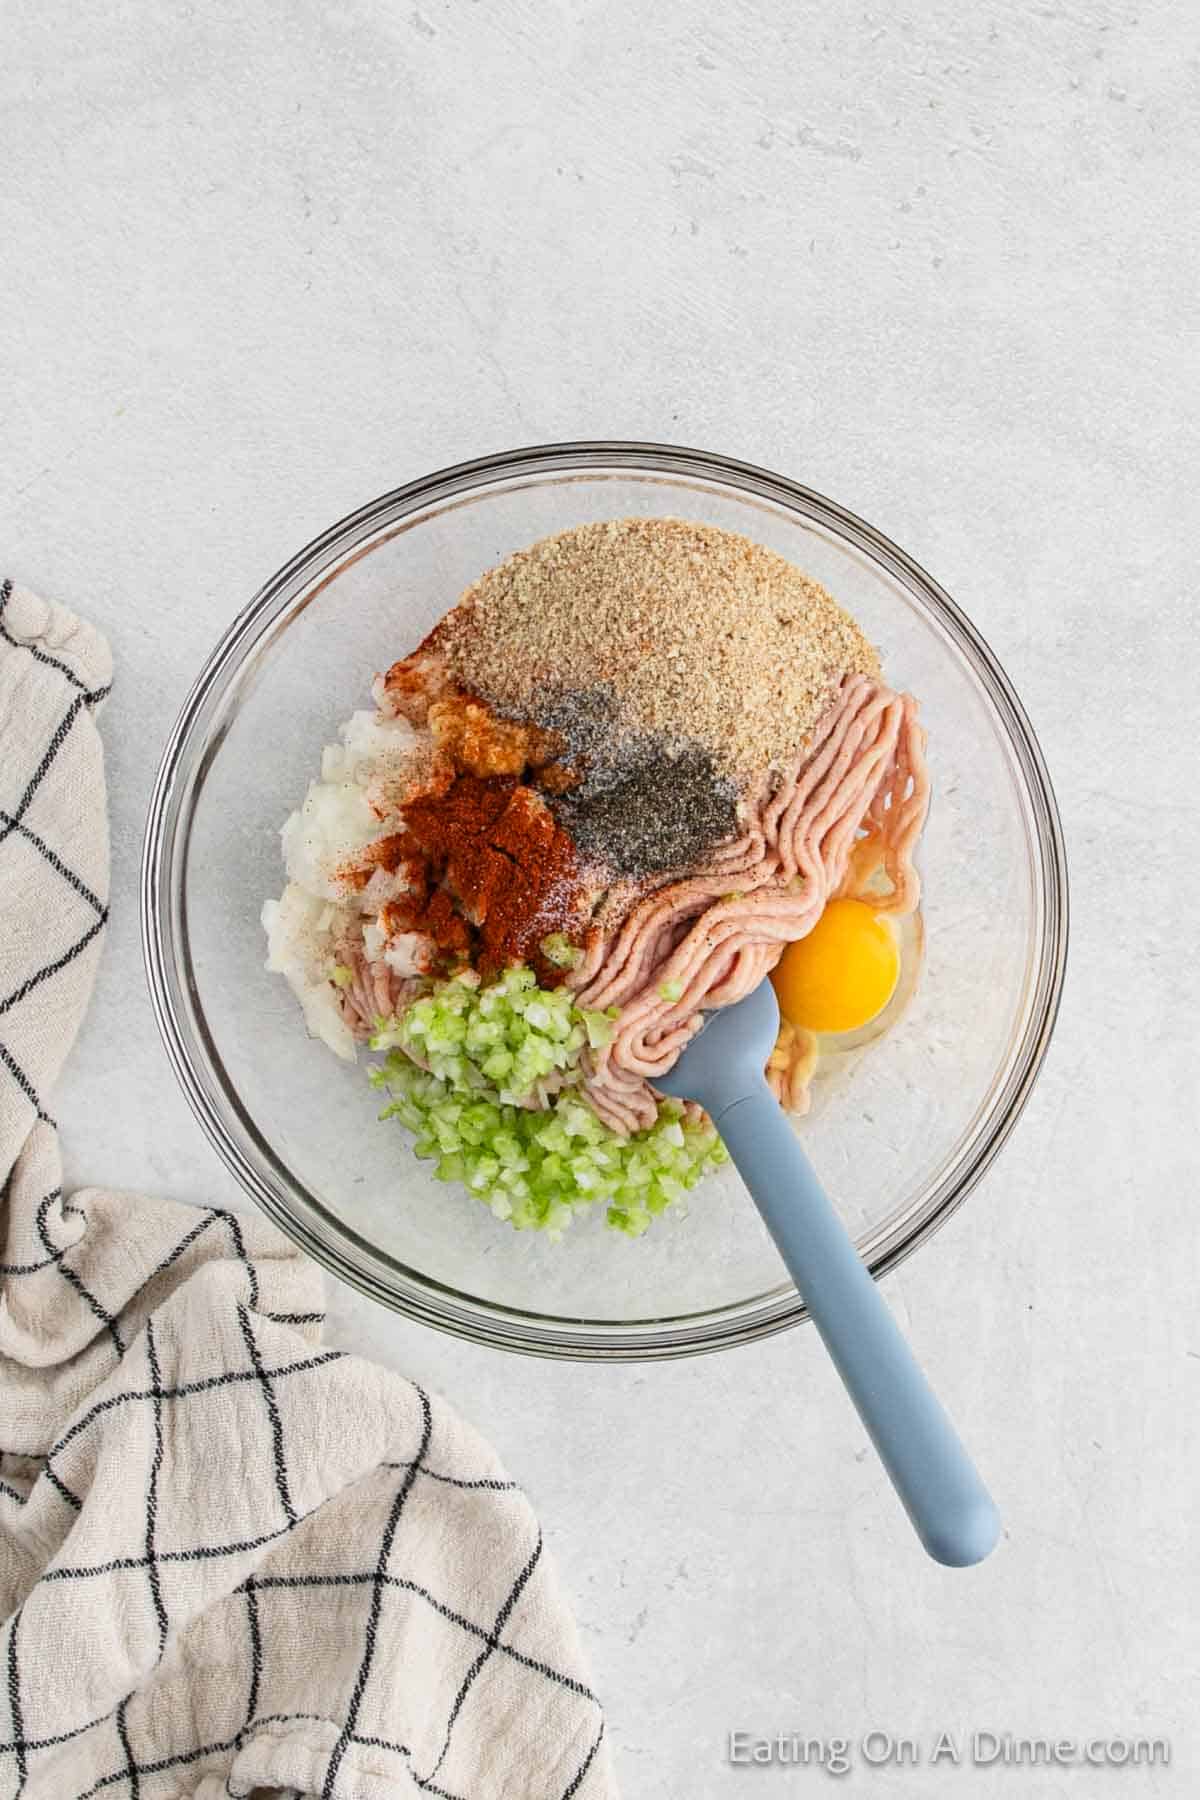 Combining ingredients in a bowl with a spatula